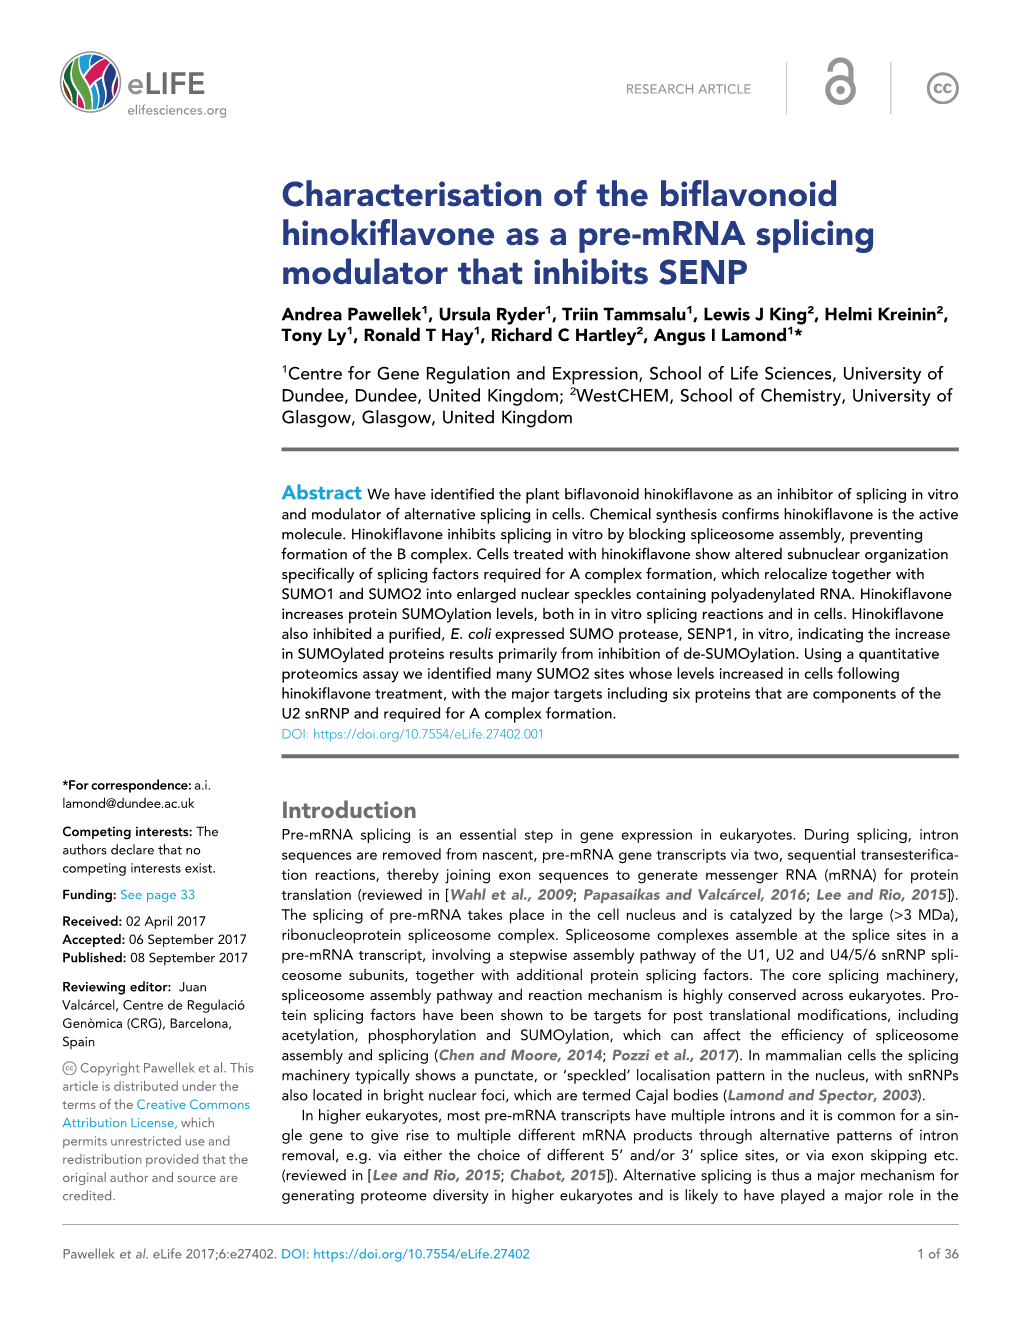 Characterisation of the Biflavonoid Hinokiflavone As a Pre-Mrna